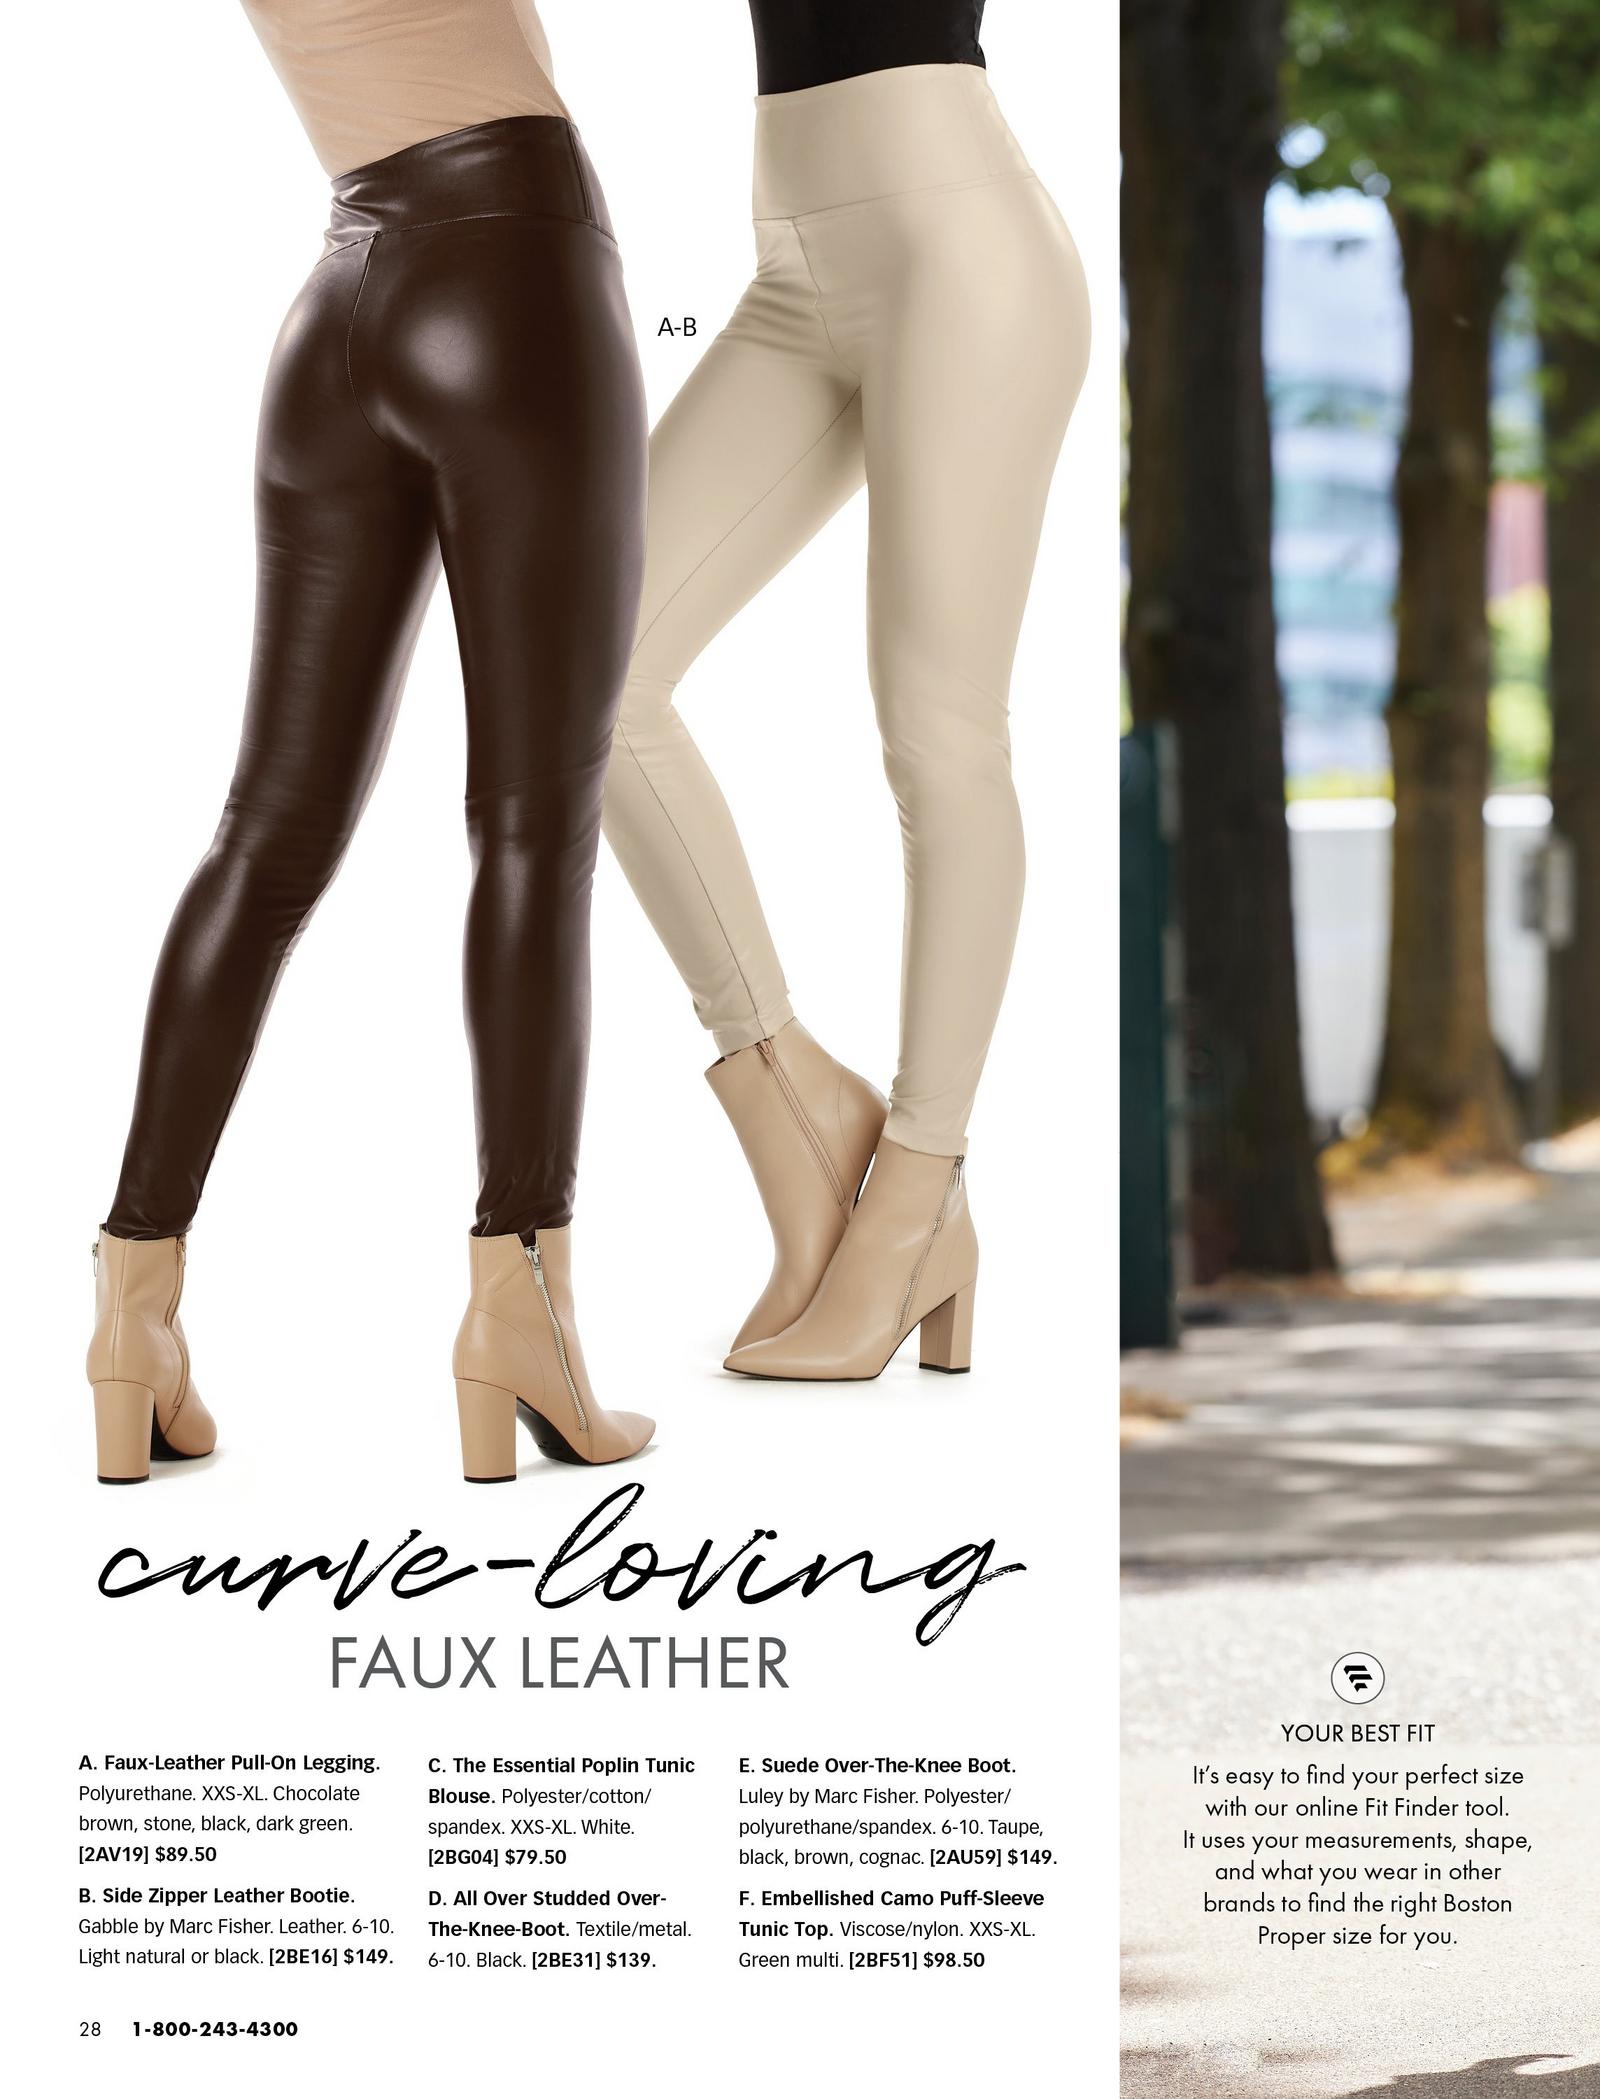 left model wearing brown faux-leather leggings and tan leather booties. right model wearing off-white faux-leather leggings and tan leather booties.